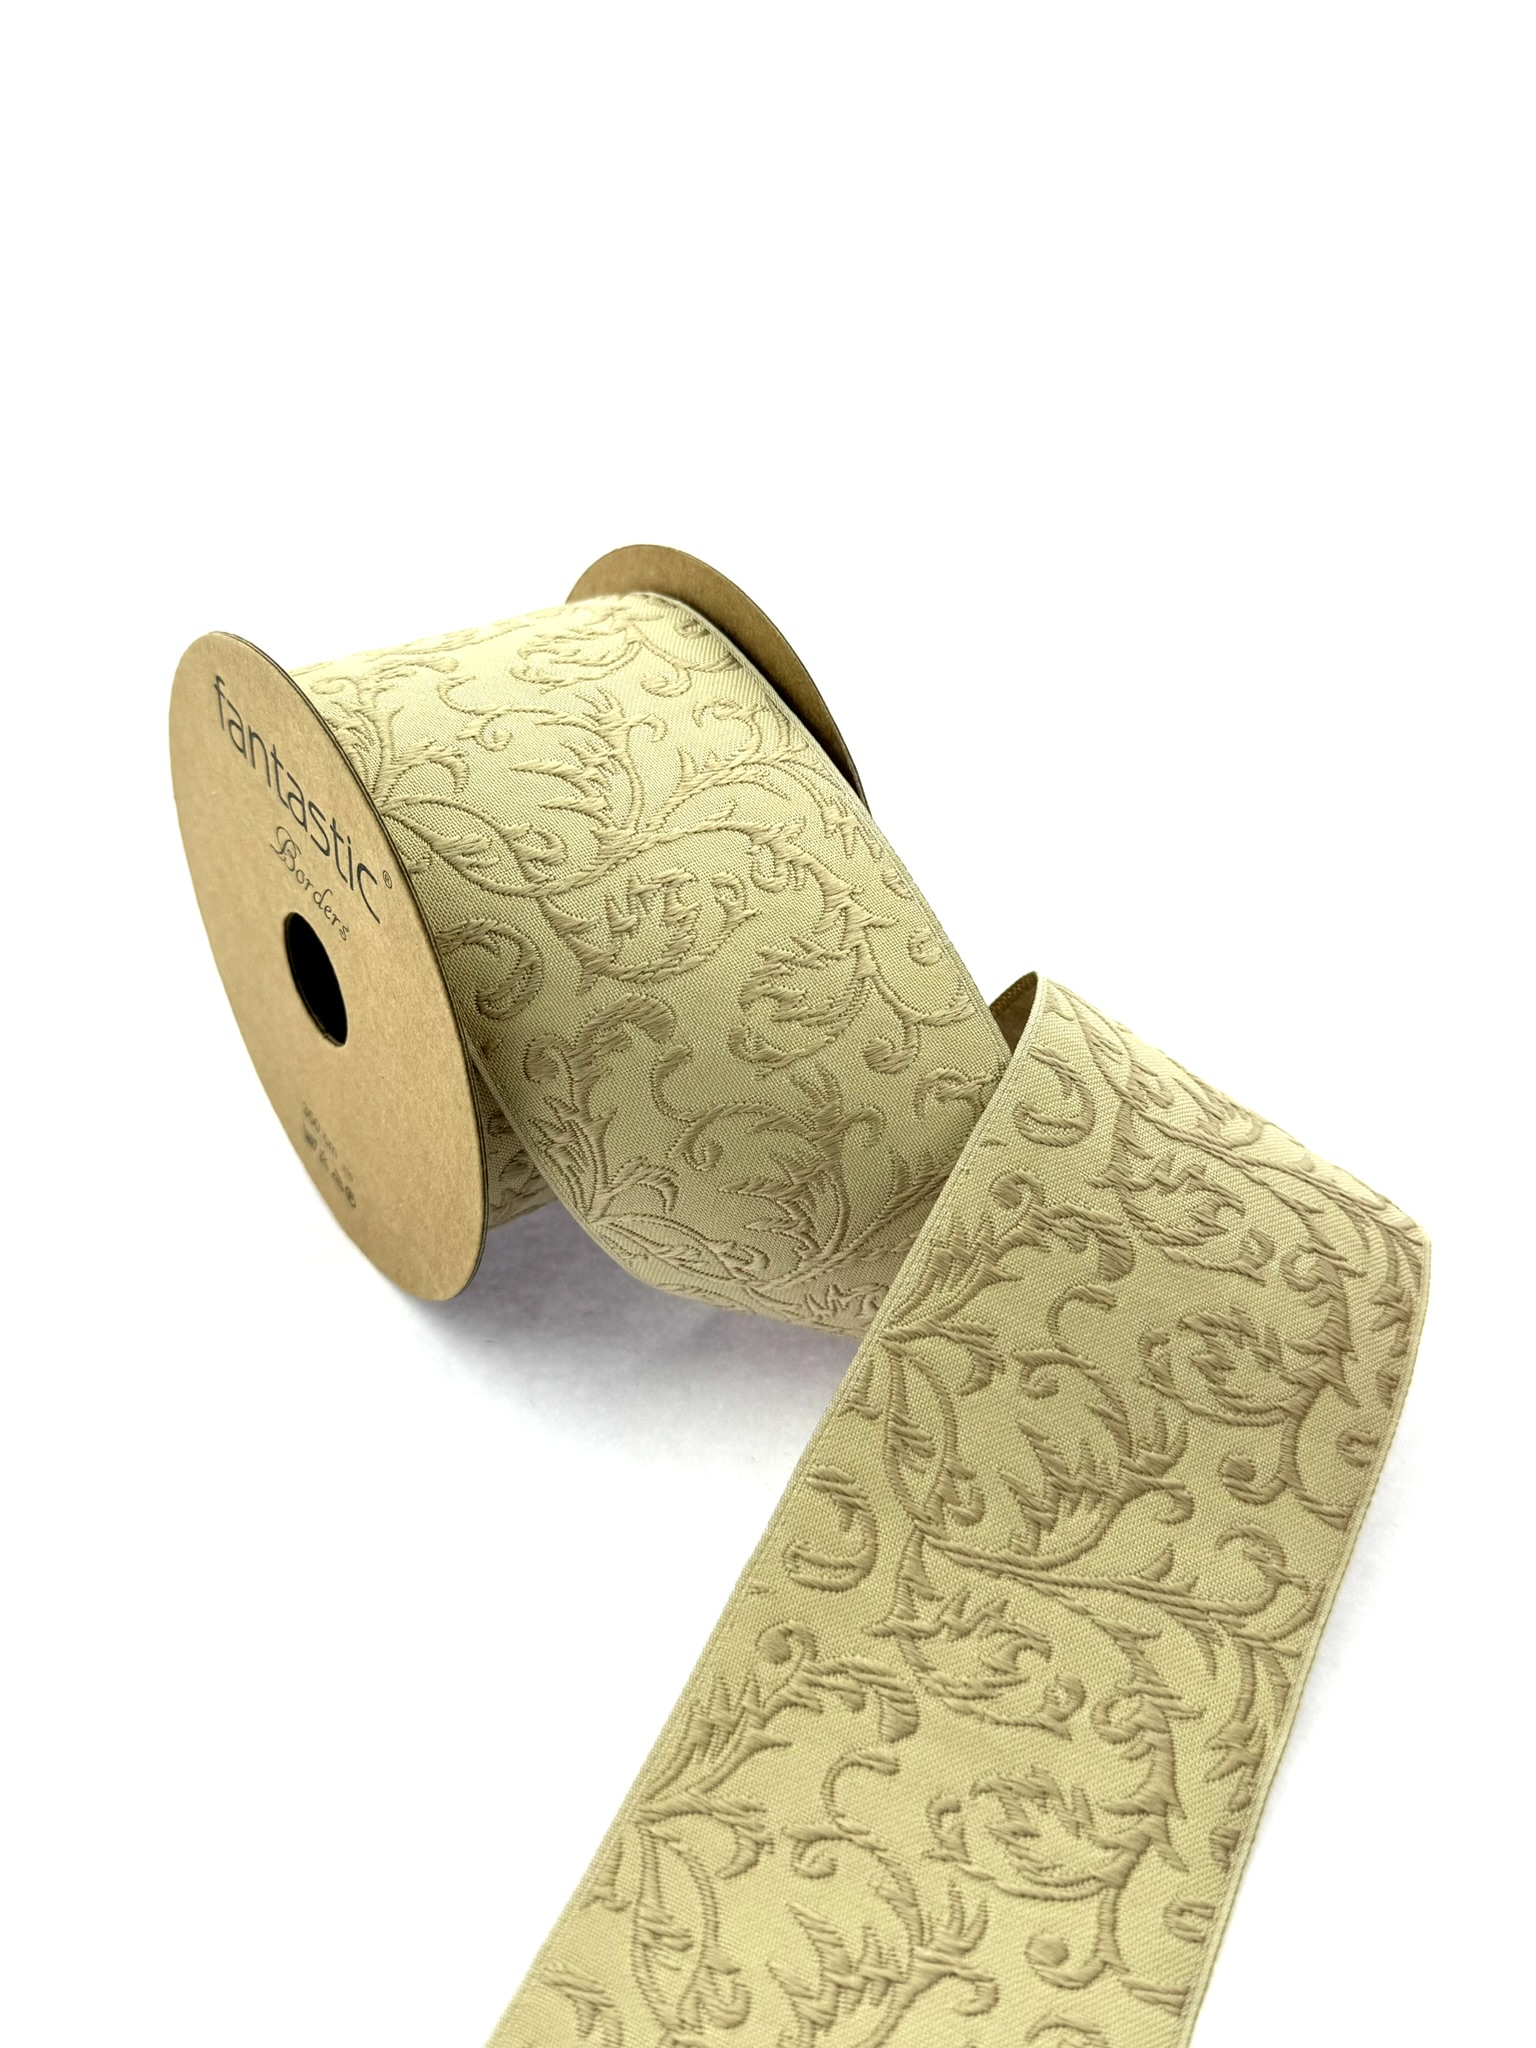 Designer Trim by the Yard, 2.75 inch Drapery Trim Tape for Curtains and Pillows, Decorative Jacquard Border Ribbon Trim, 70212